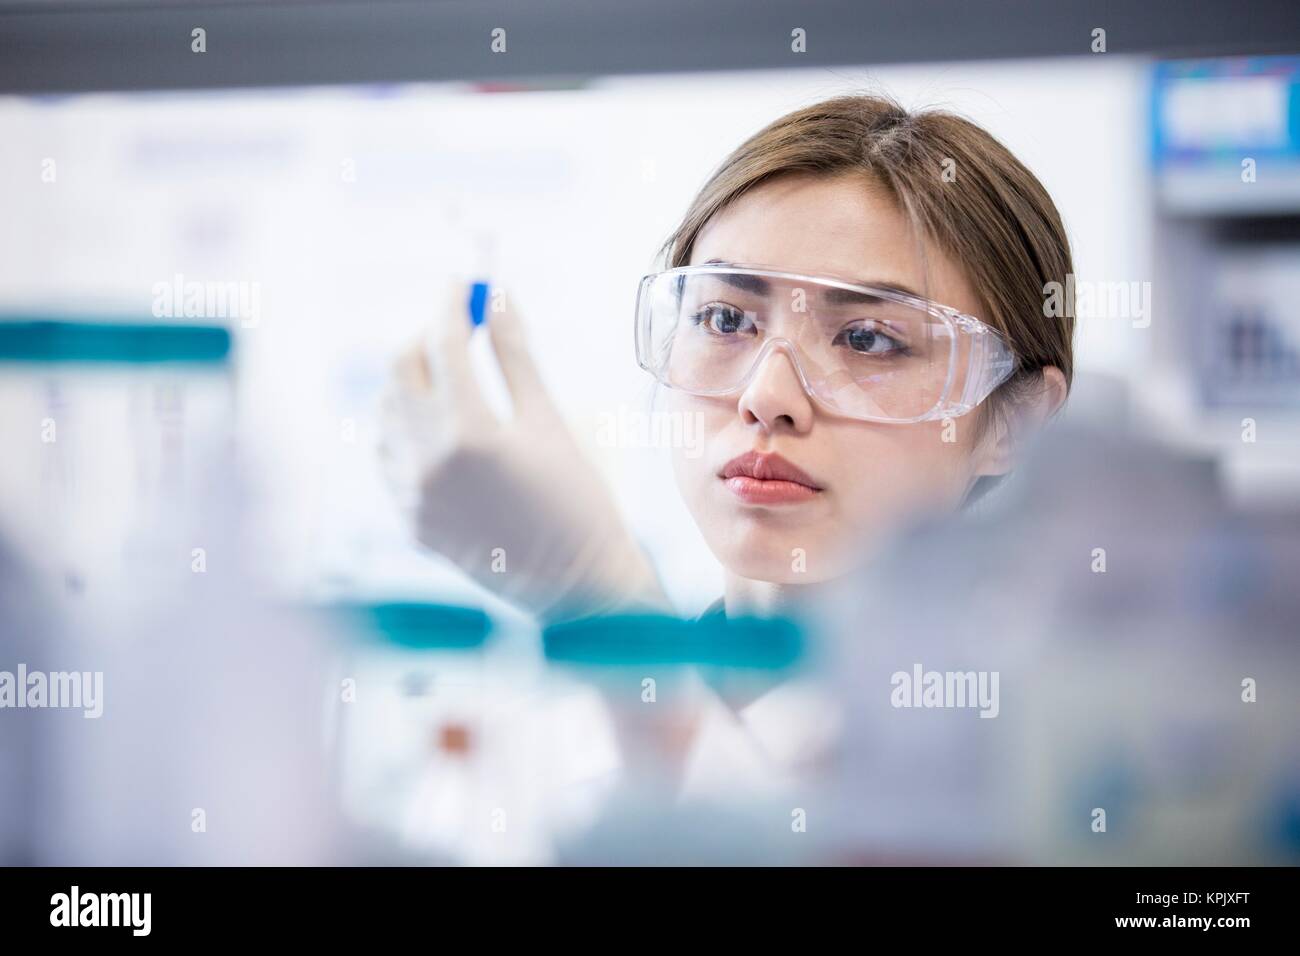 Female laboratory assistant wearing safety goggles. Stock Photo